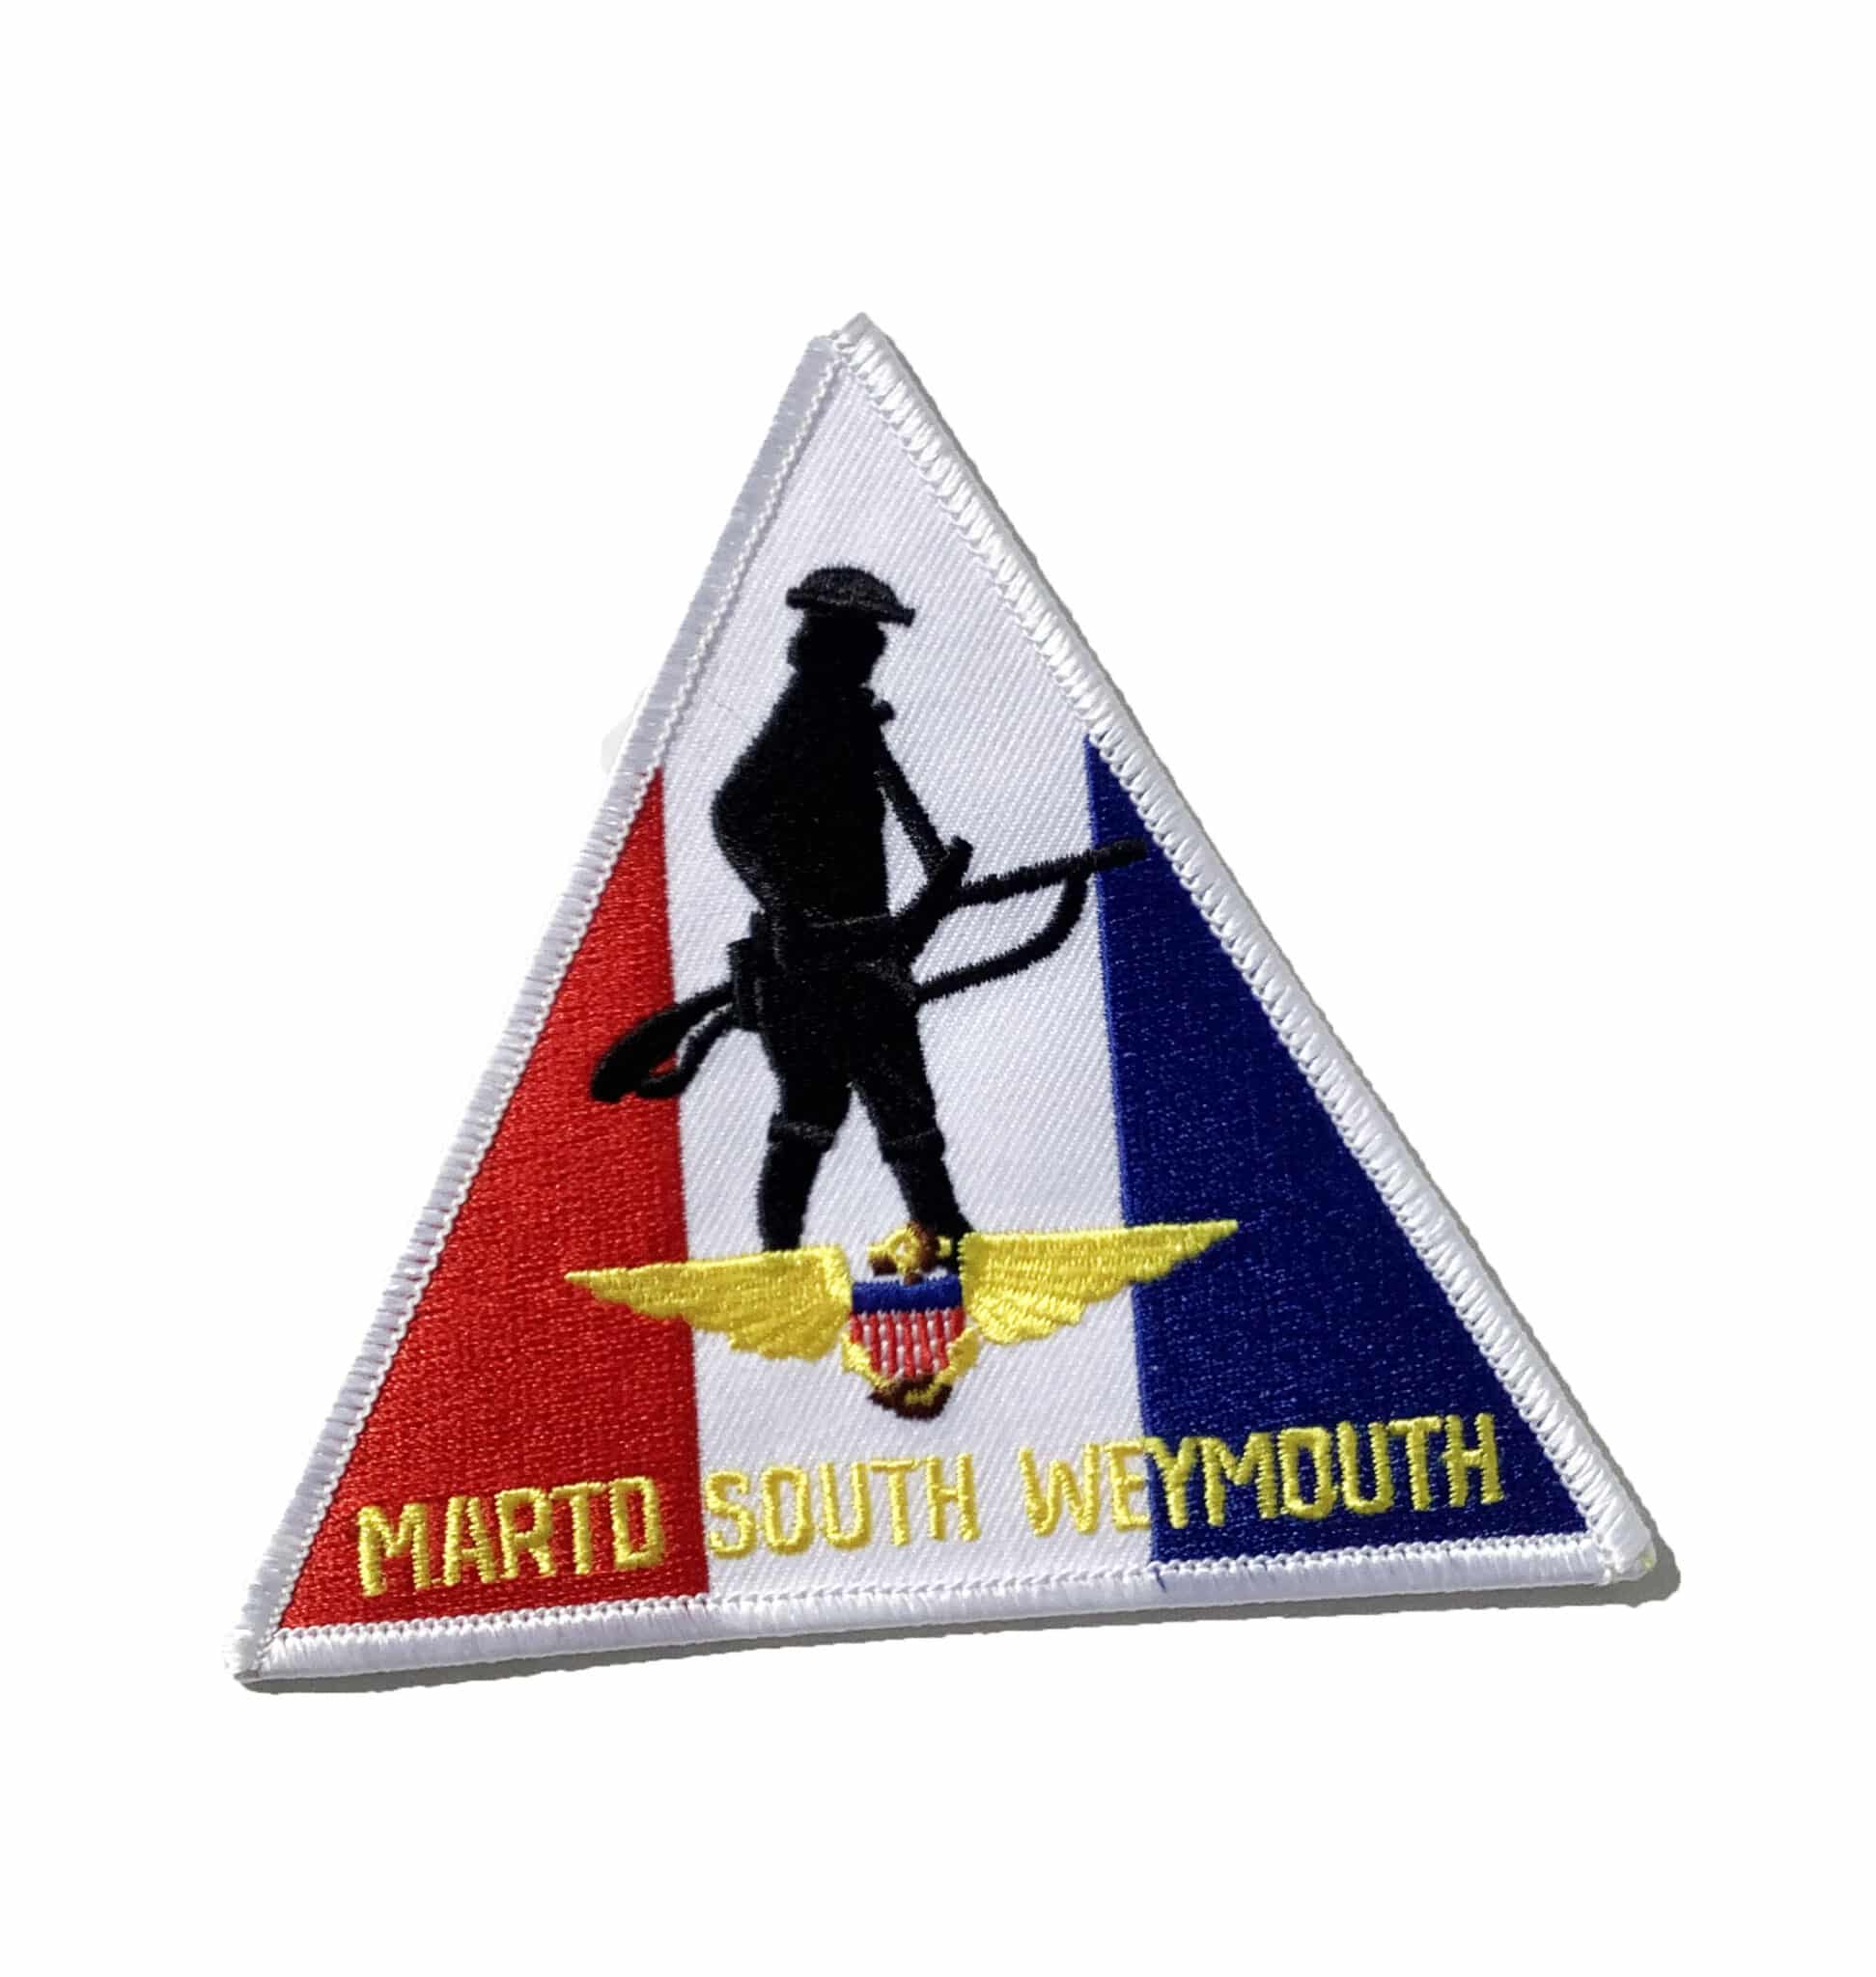 MARTD South Weymouth Patch – No Hook & Loop